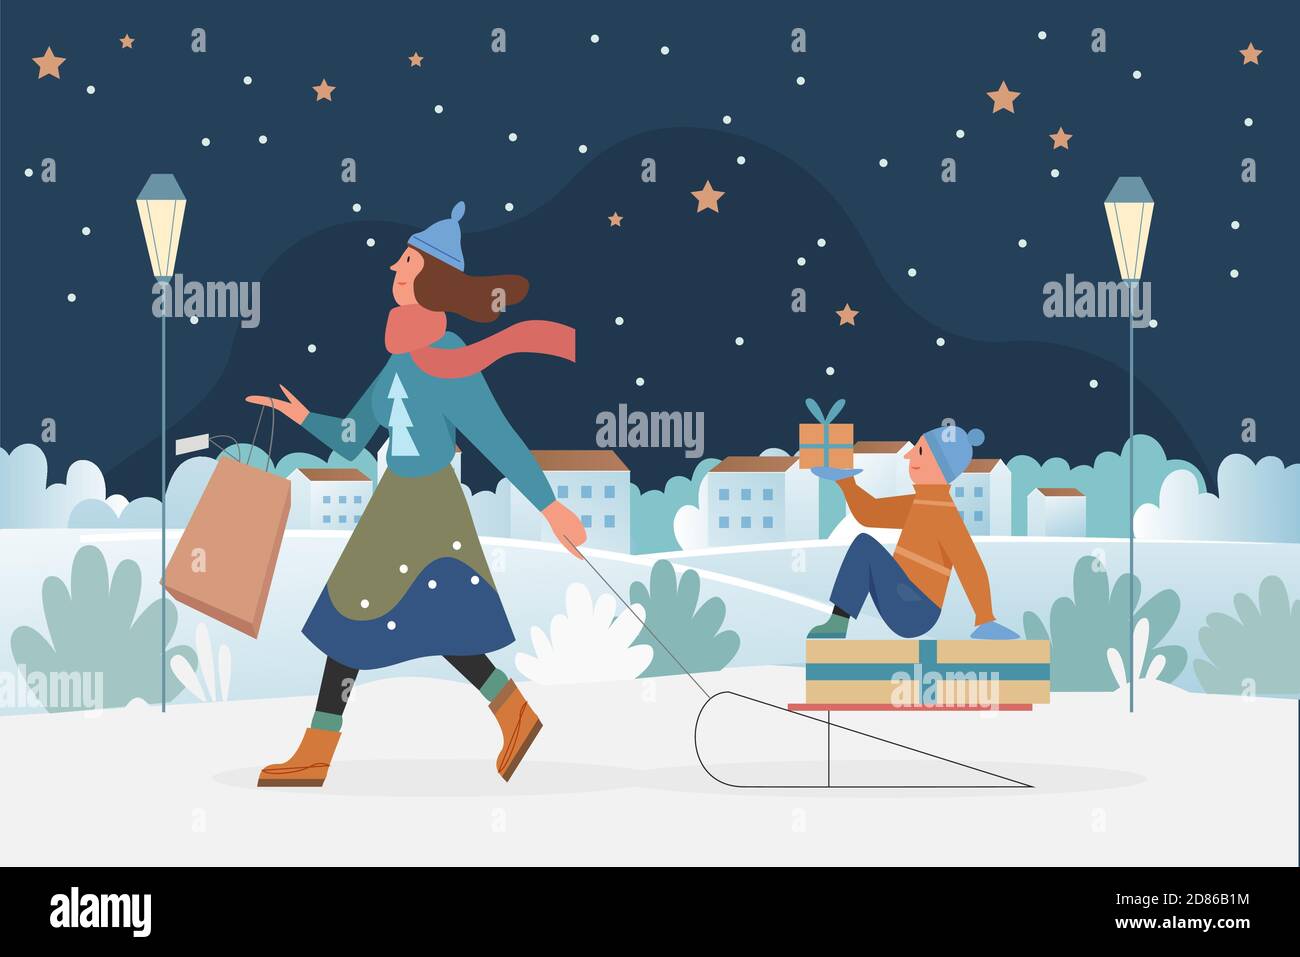 Family people sledding, Christmas outdoor activity vector illustration. Cartoon mother with kid son enjoying sleigh ride, holding shopping bags with gifts to celebrate winter xmas holidays background Stock Vector